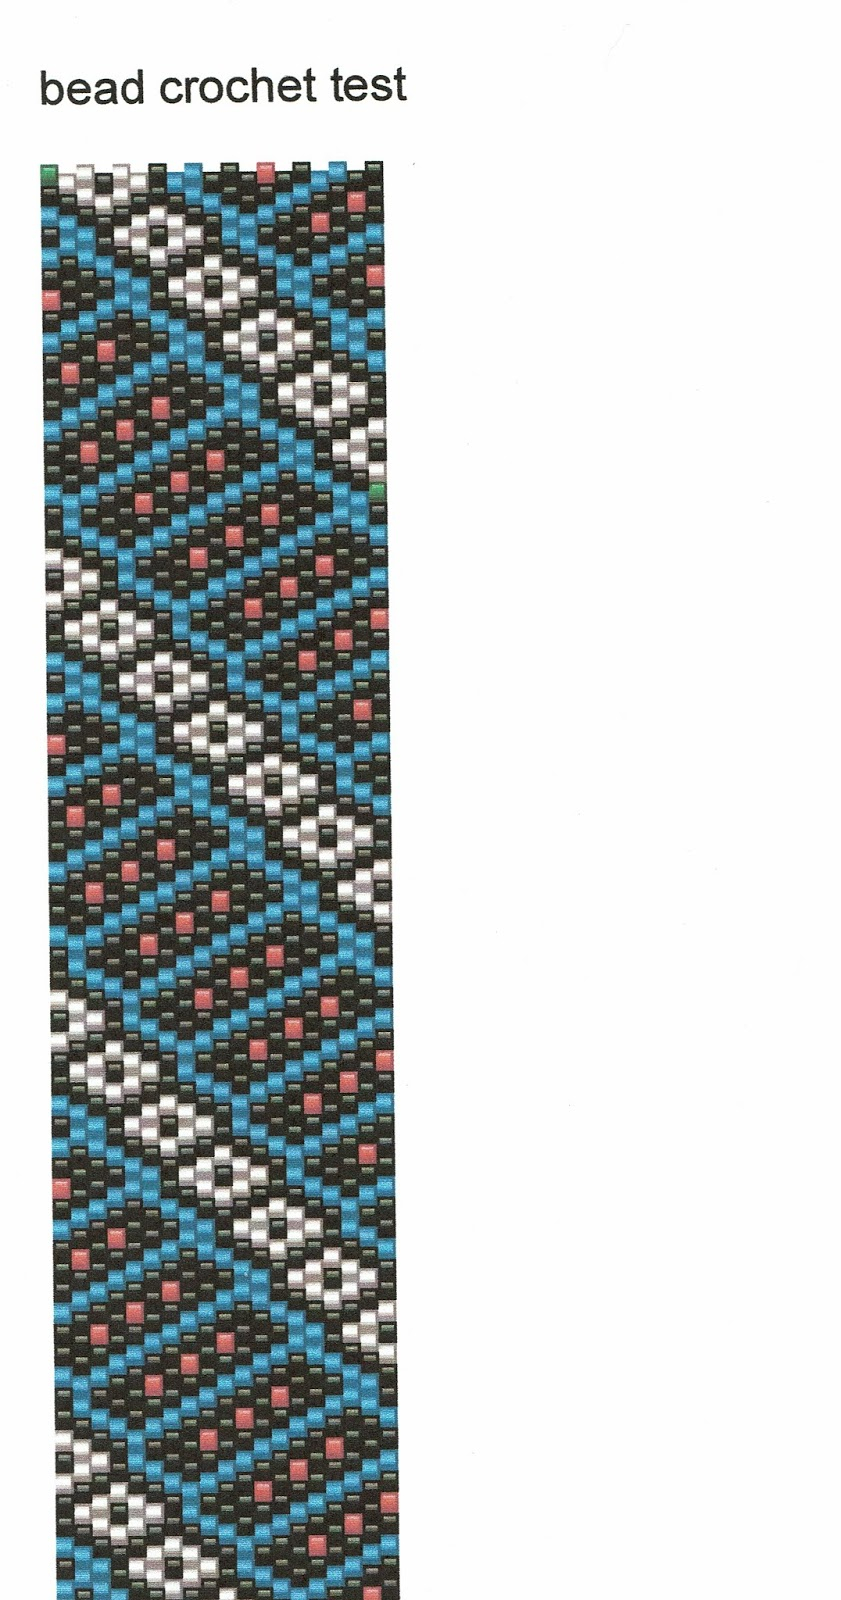 Bead Crochet Rope Patterns Can You Use A Beaded Crochet Rope Pattern For Pwat Peyote With A